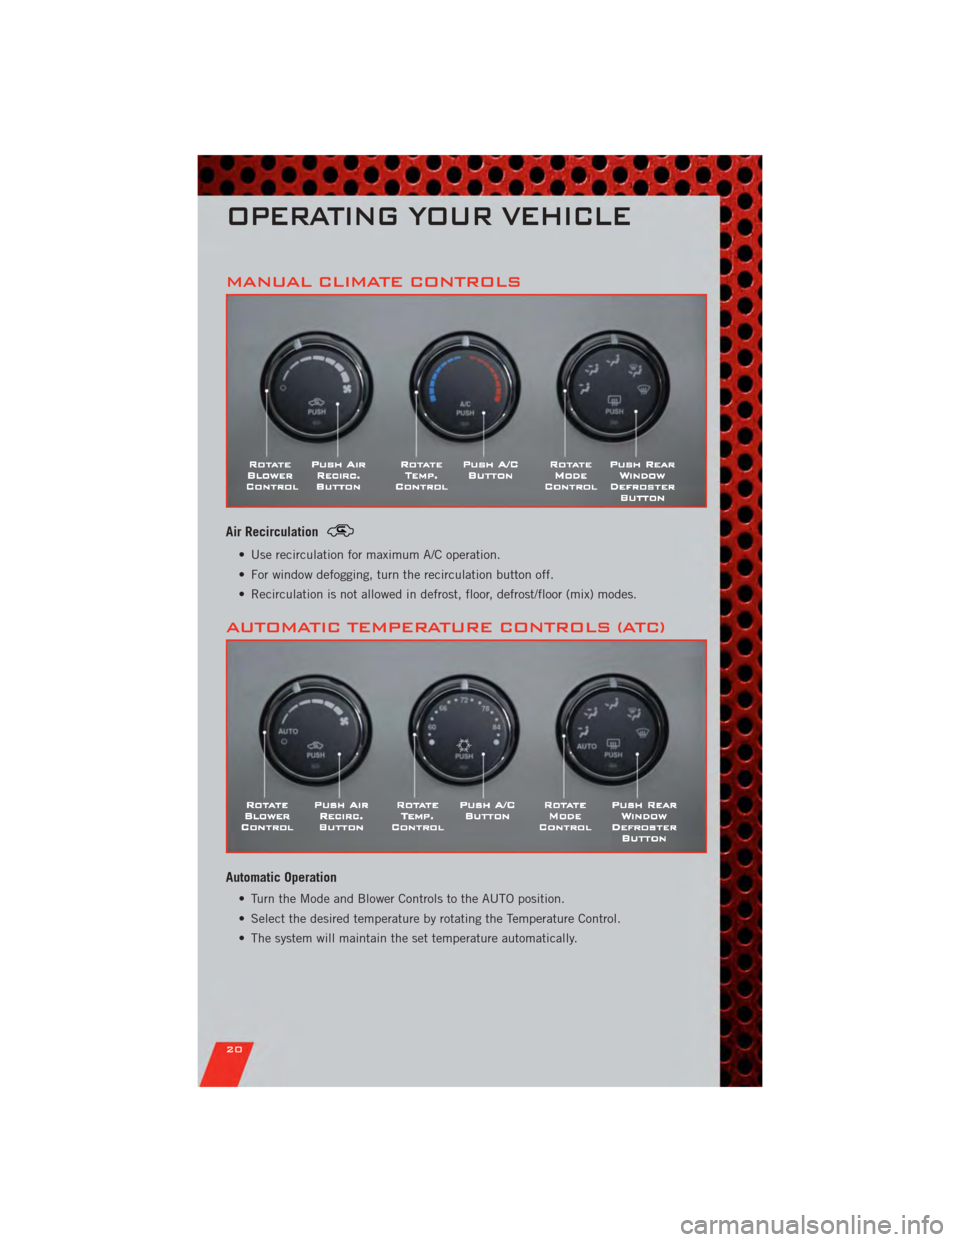 DODGE NITRO 2011 1.G Owners Manual MANUAL CLIMATE CONTROLS
Air Recirculation
• Use recirculation for maximum A/C operation.
• For window defogging, turn the recirculation button off.
• Recirculation is not allowed in defrost, flo